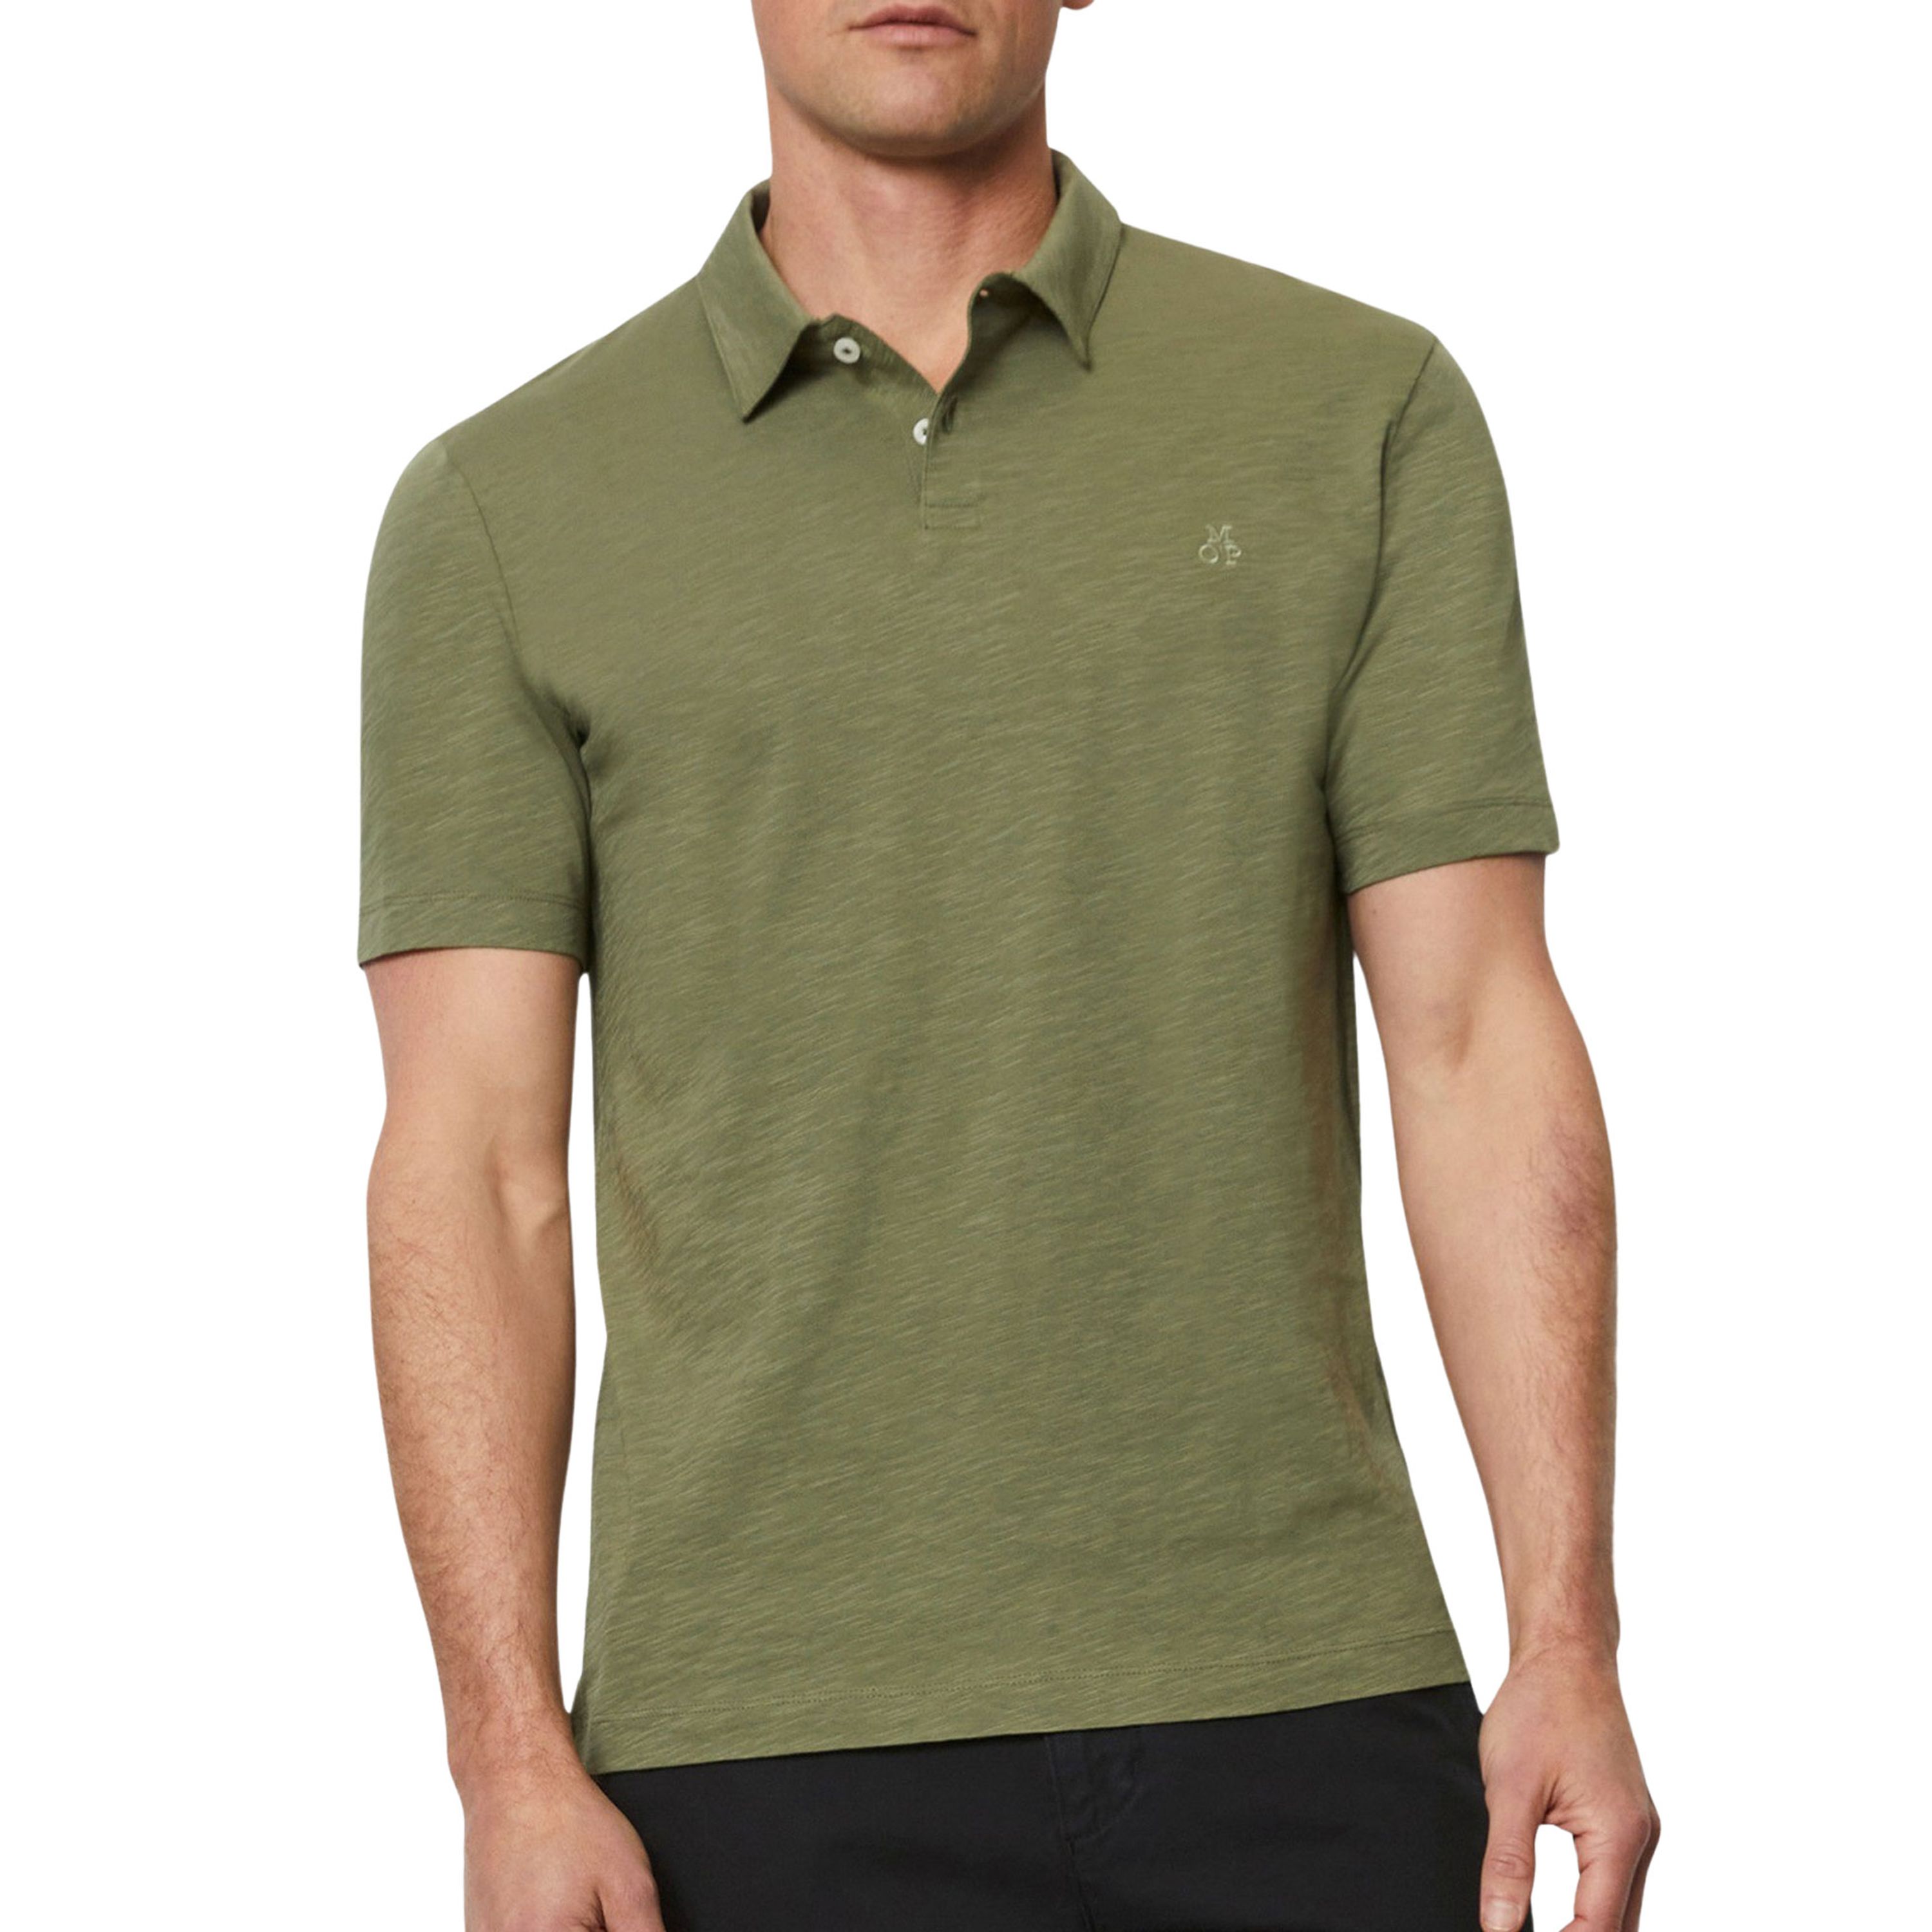 Marc O'Polo Shaped fit poloshirt met labelstitching